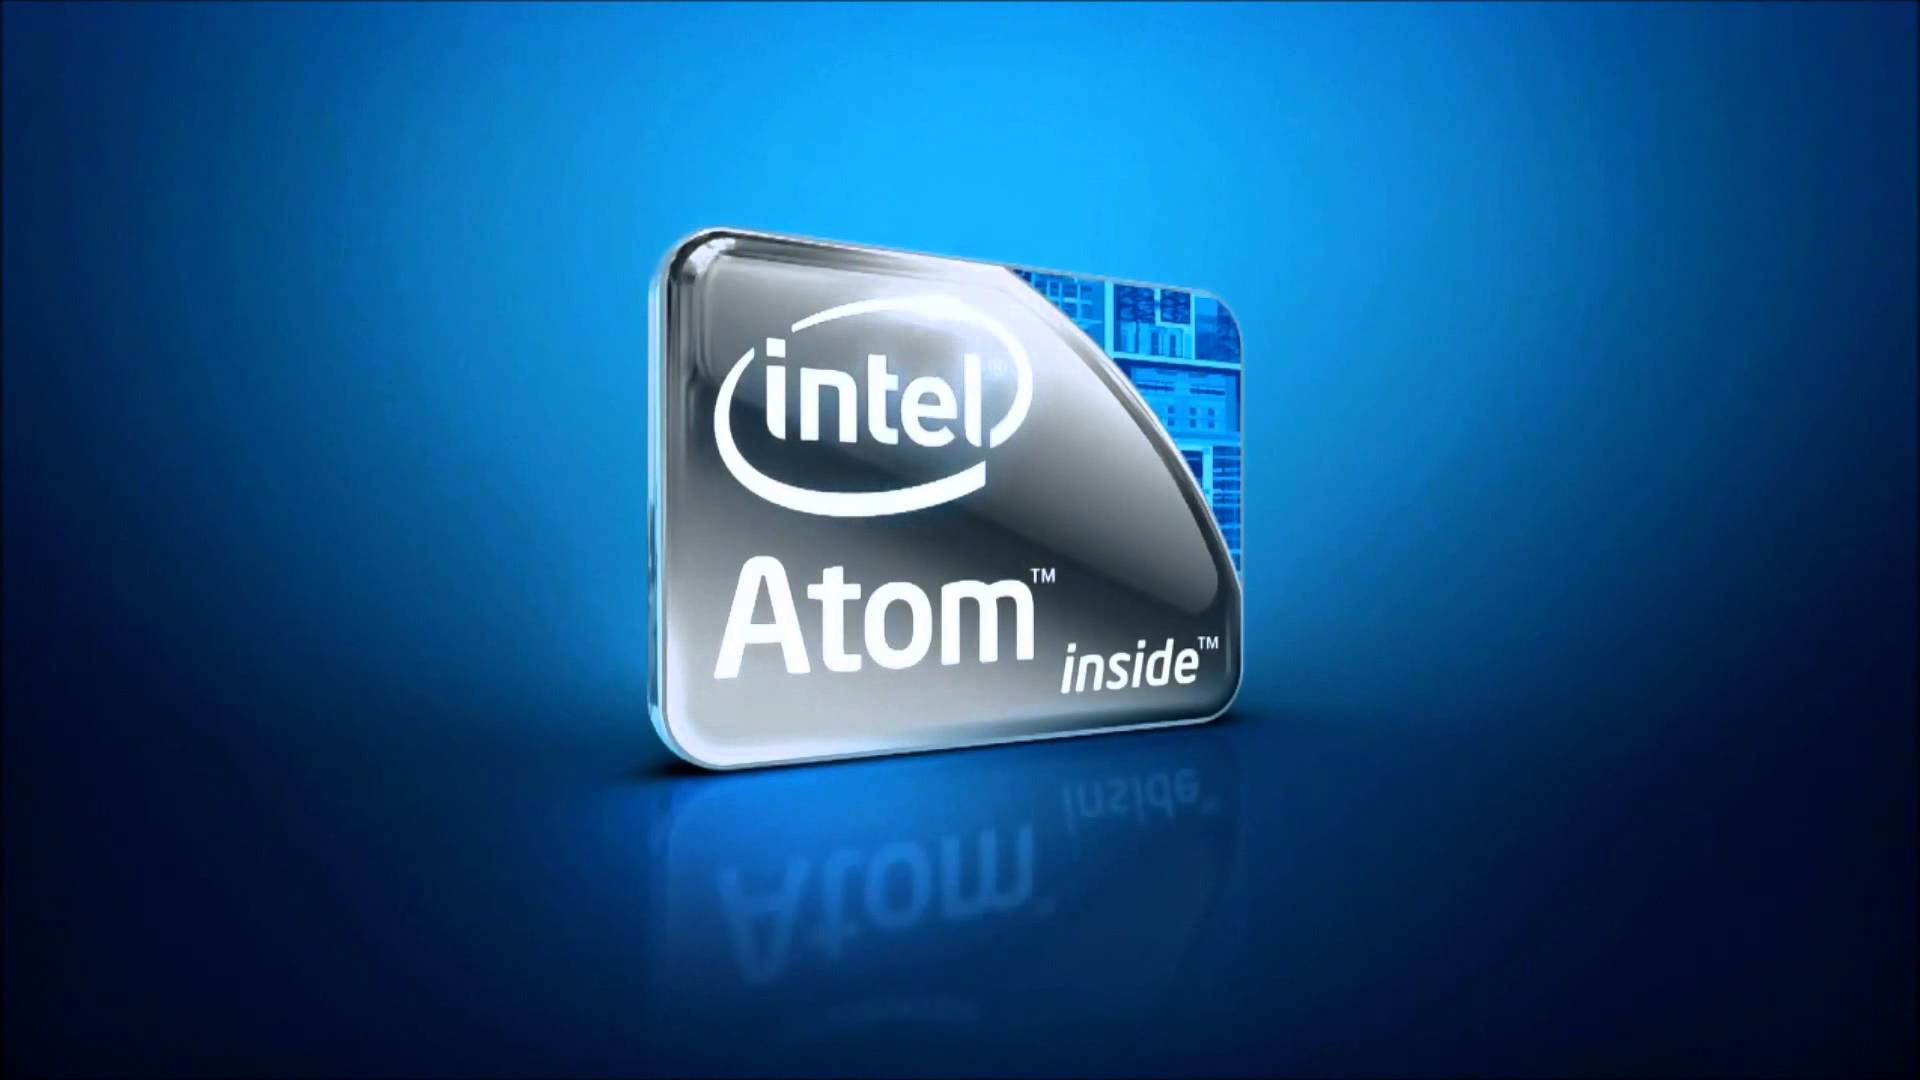 Intel Atom Logo - Intel Atom Cherry Trail chipsets could disappoint, suggest early